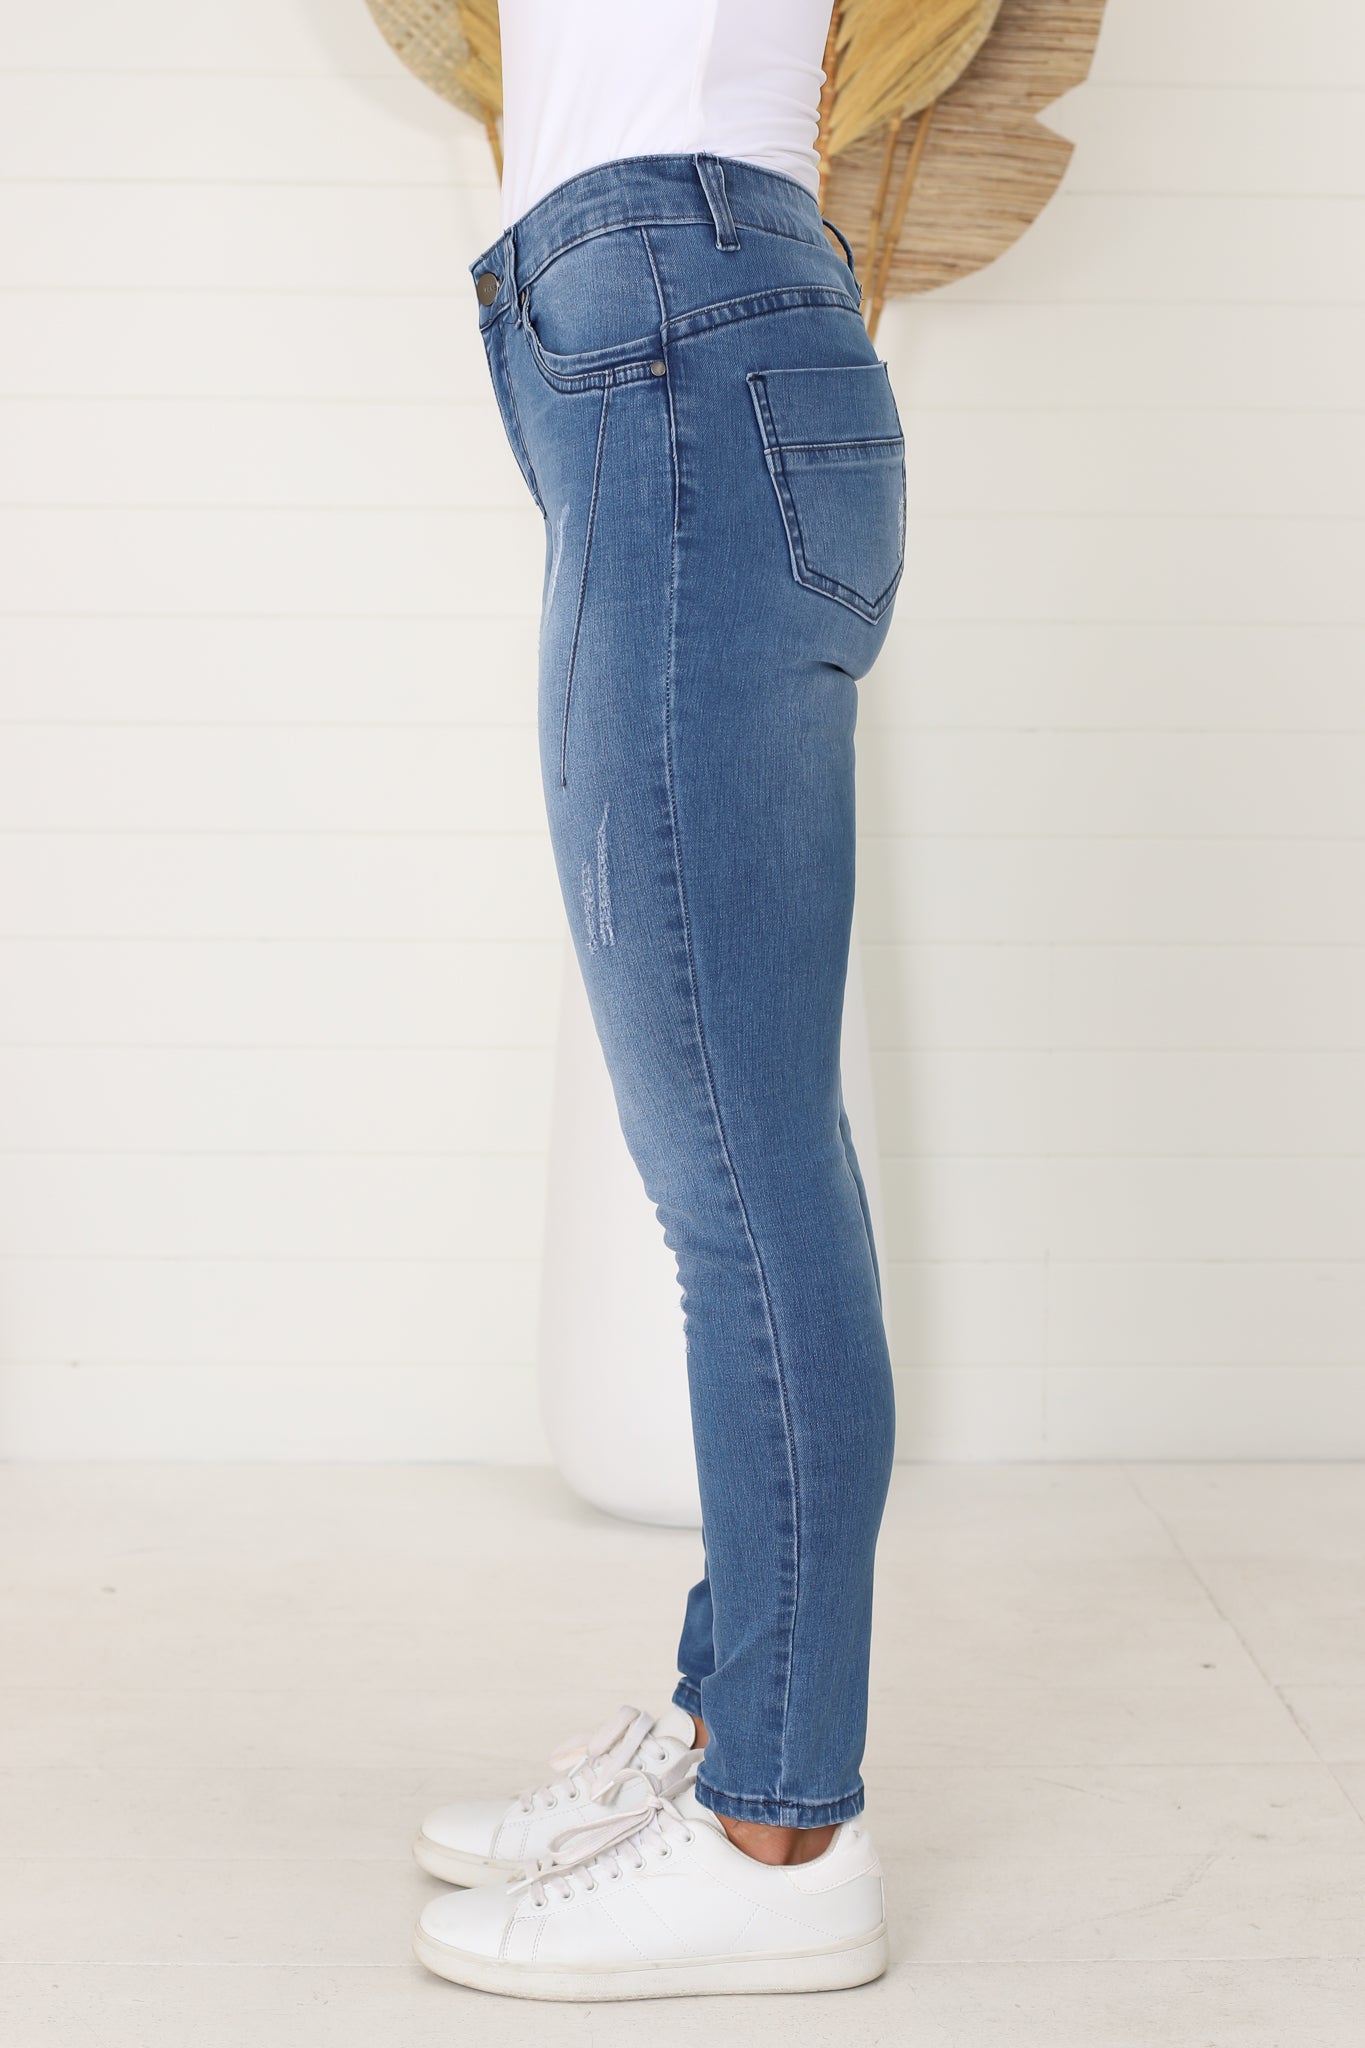 Laurel Jeans - Mid Rise Skinny Leg Distressed Jeans in Blue